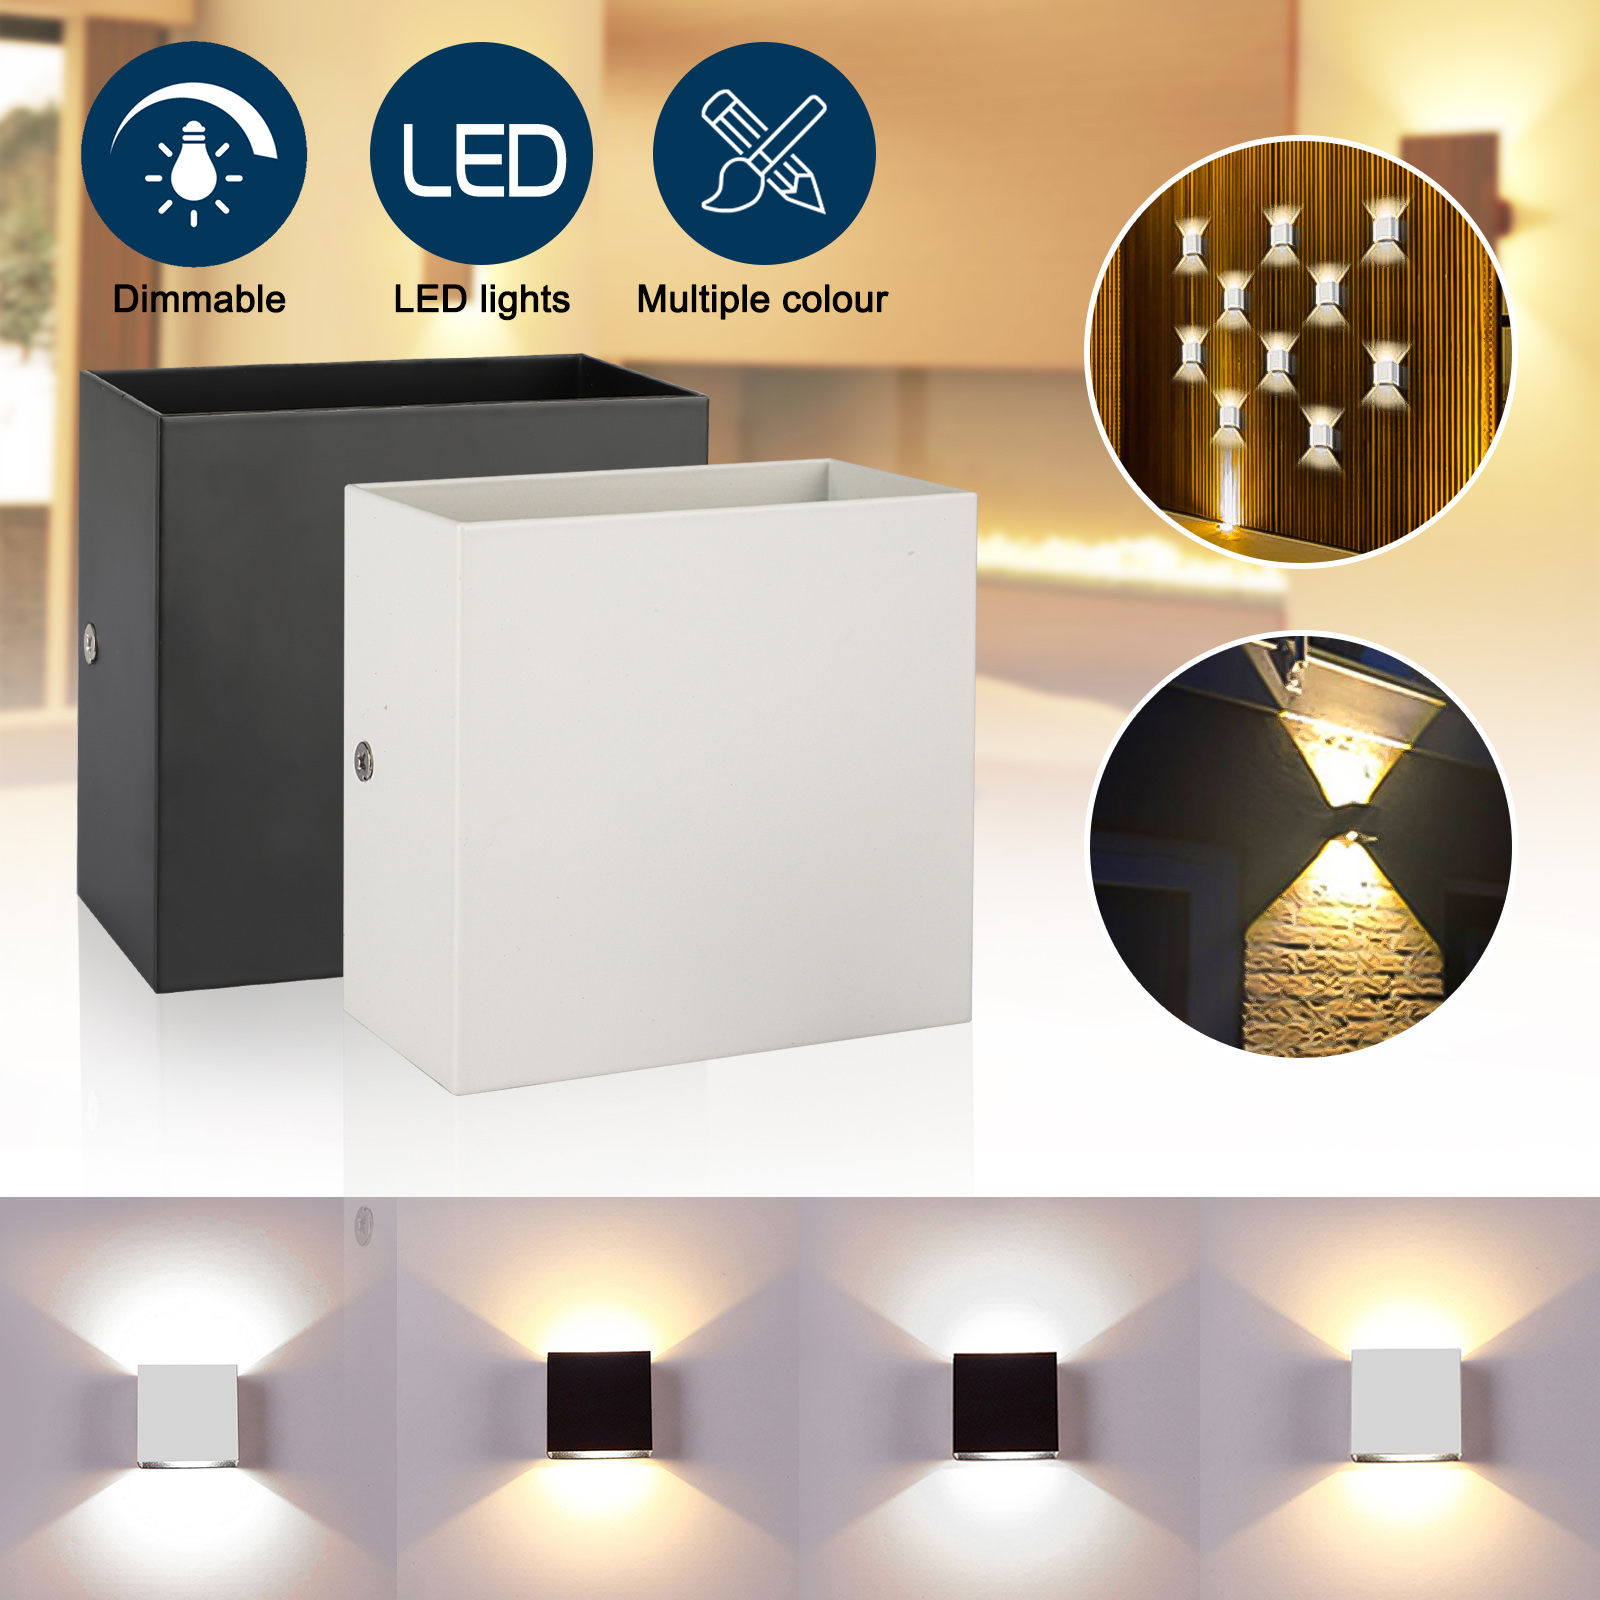 6W/12W Modern LED Wall Light Up Down Cube Indoor Outdoor Sconce Lighting Lamp 